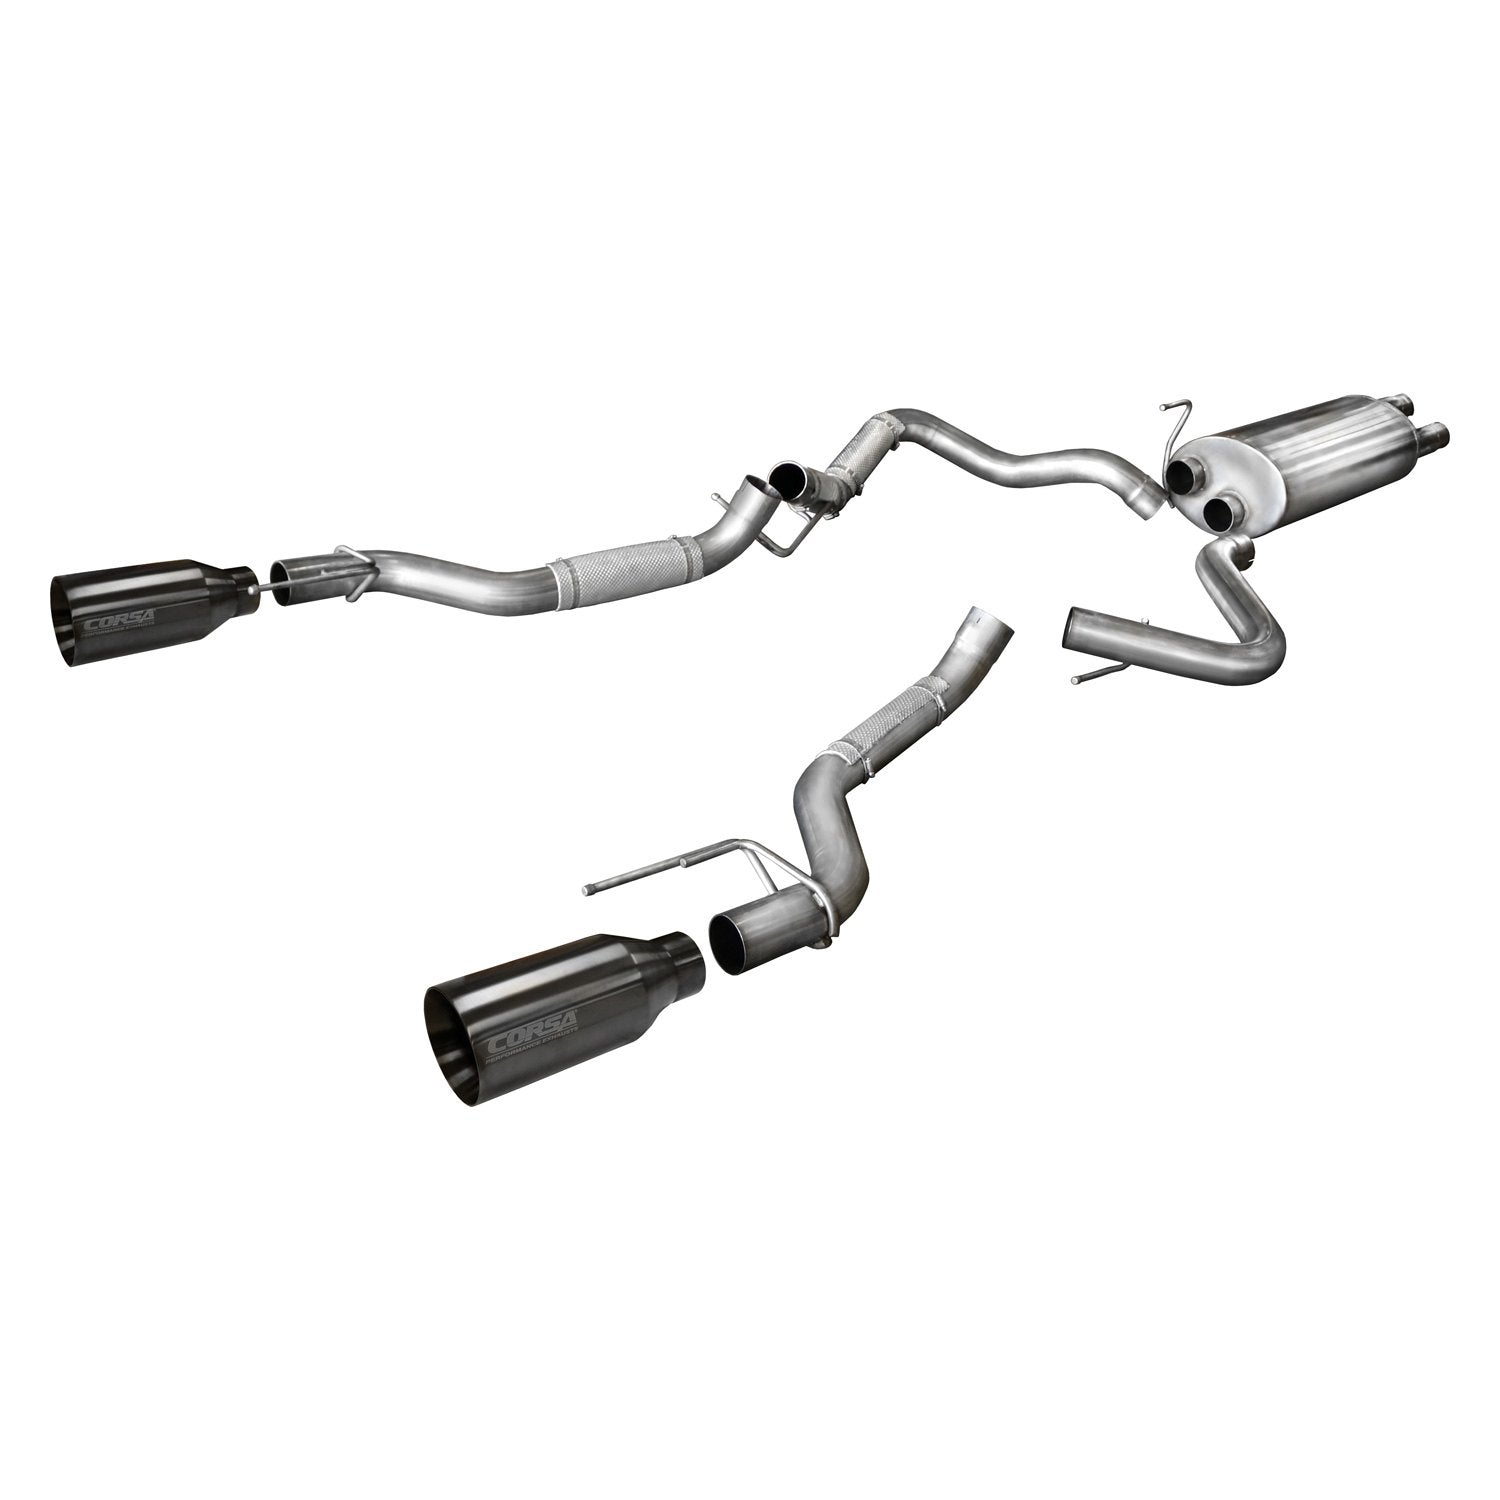 Corsa Stainless Steel Exhaust Muffler Upgrade Kit For Ford F-150 17-20 14398